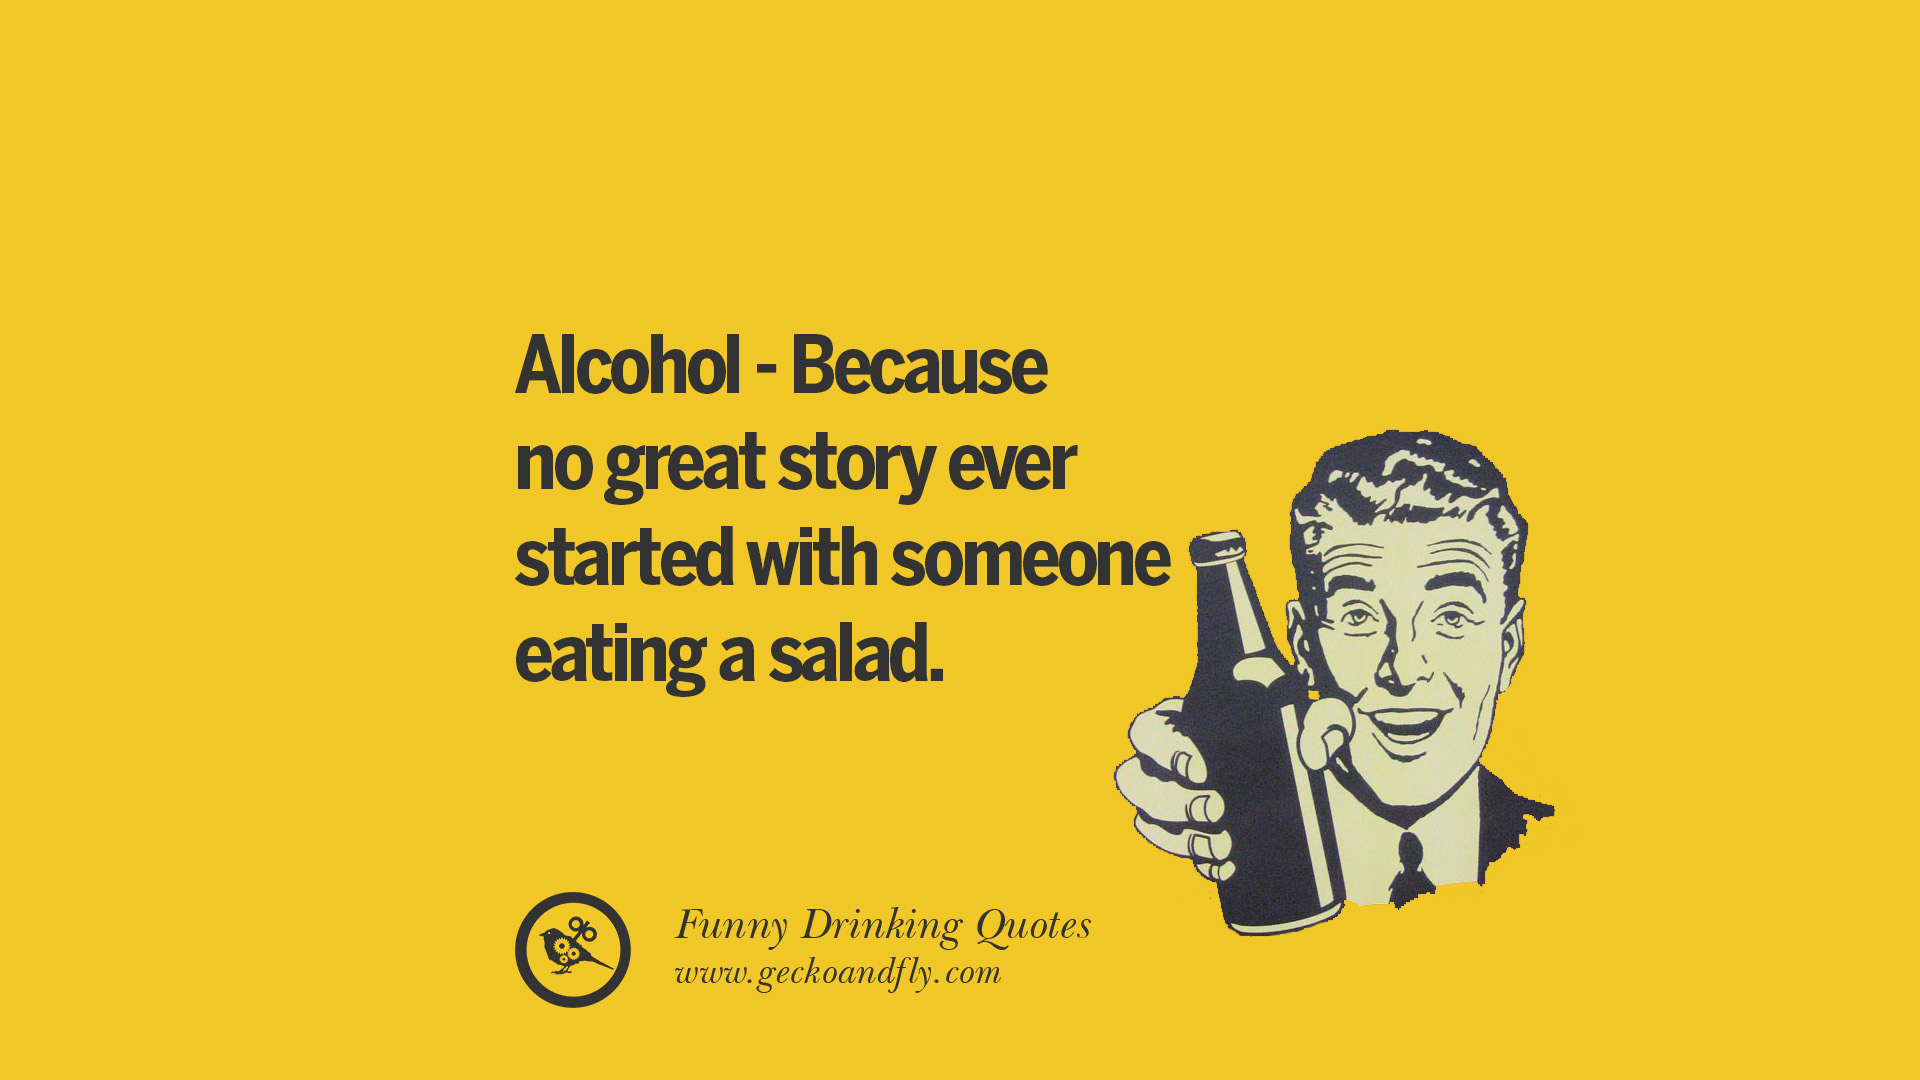 50 Funny Saying On Drinking Alcohol, Having Fun, And Partying